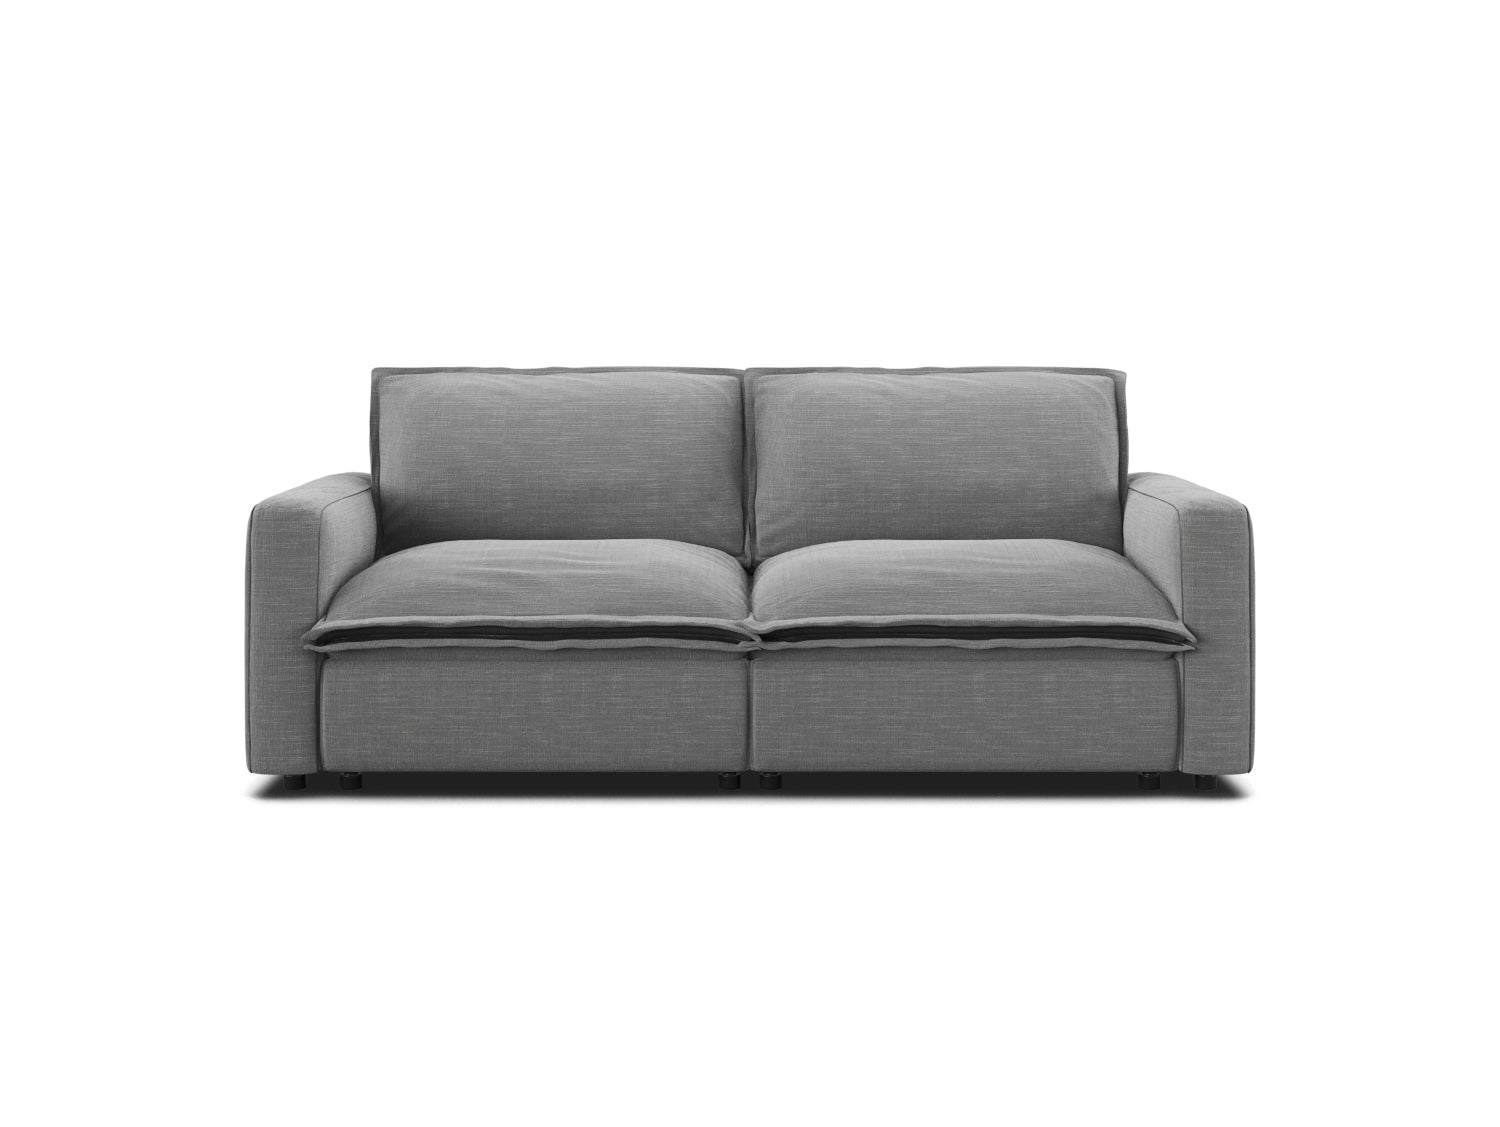 Two seat sectional couch in grey linen, modular